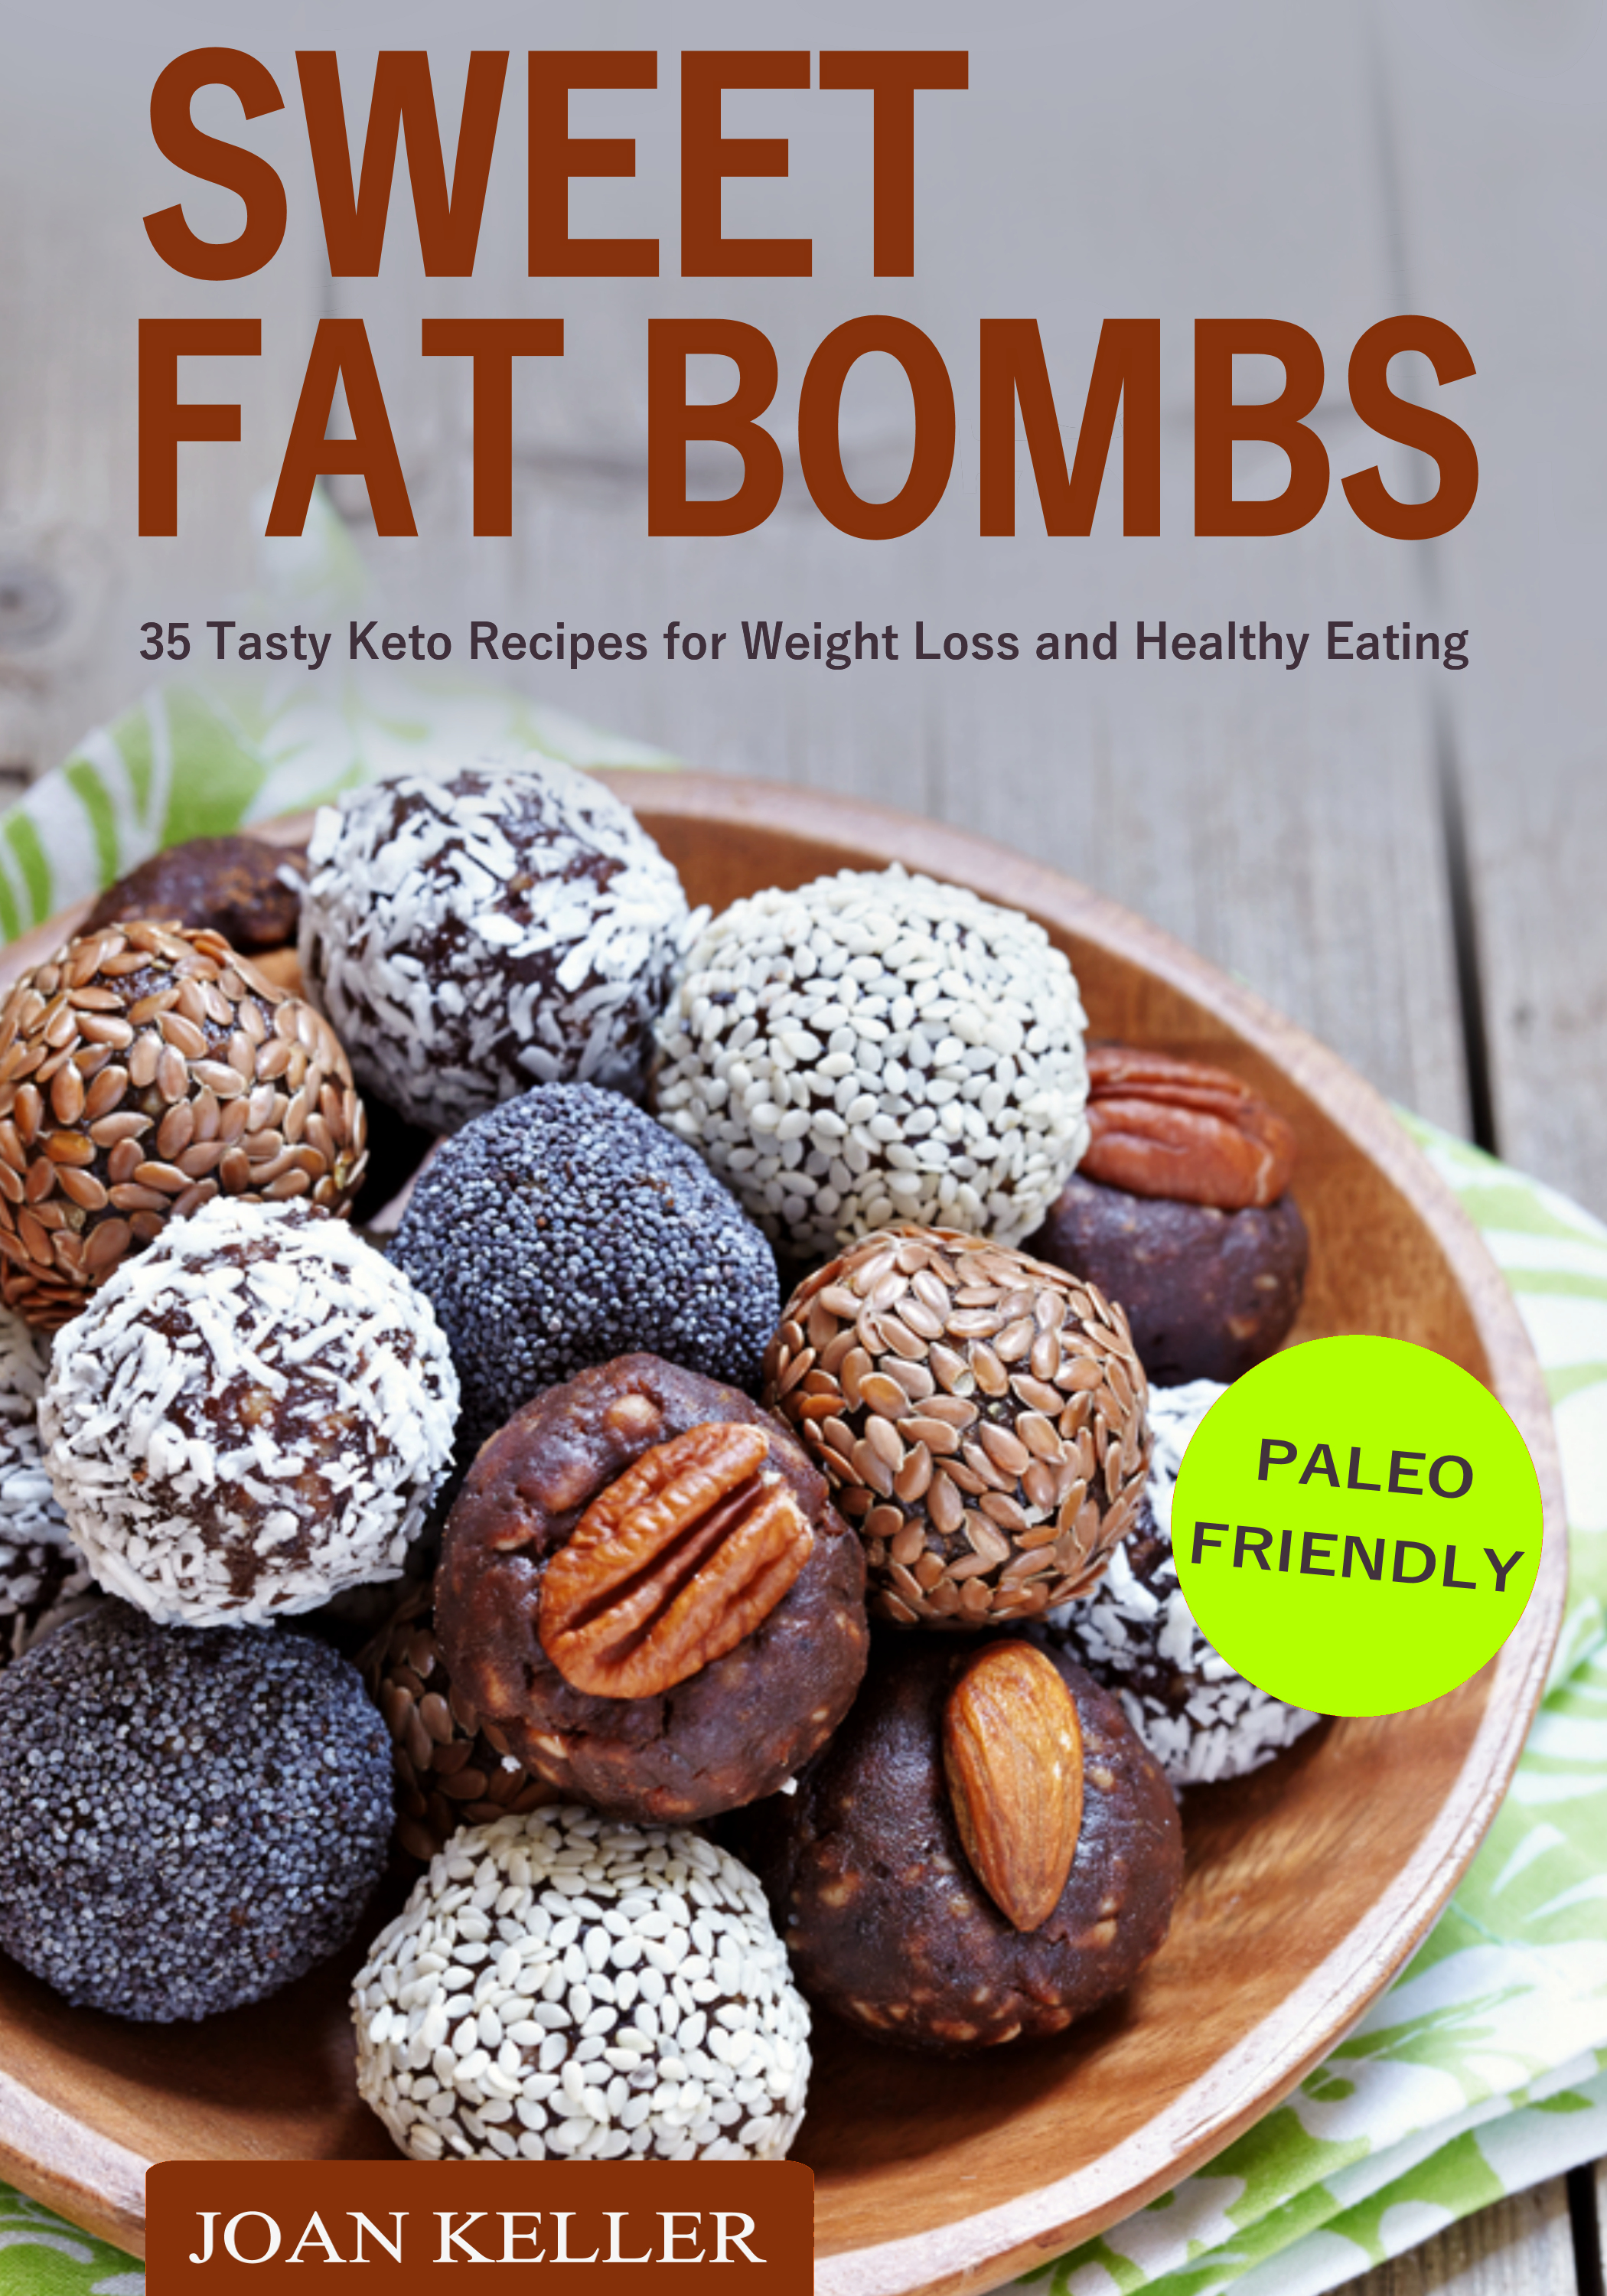 FREE: Sweet Fat Bombs: 35 Tasty Keto Recipes for  Weight Loss and Healthy Eating (Quick & Easy Recipes for Ketogenic, Paleo & Low-Carb Diets) by Joan Keller